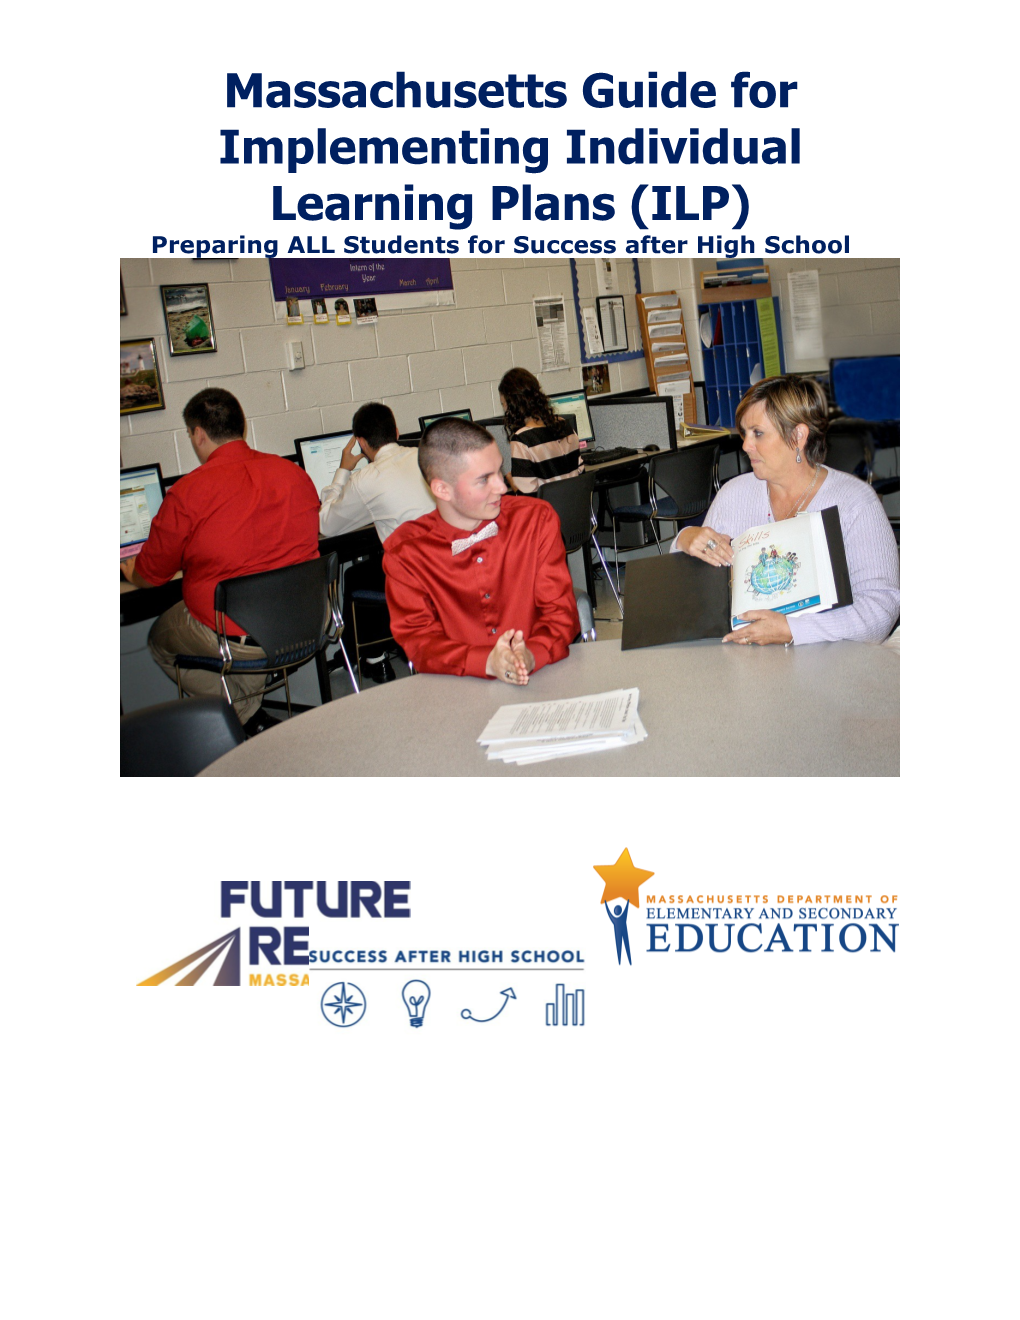 Massachusetts Guide for Implementing Individual Learning Plans (ILP)